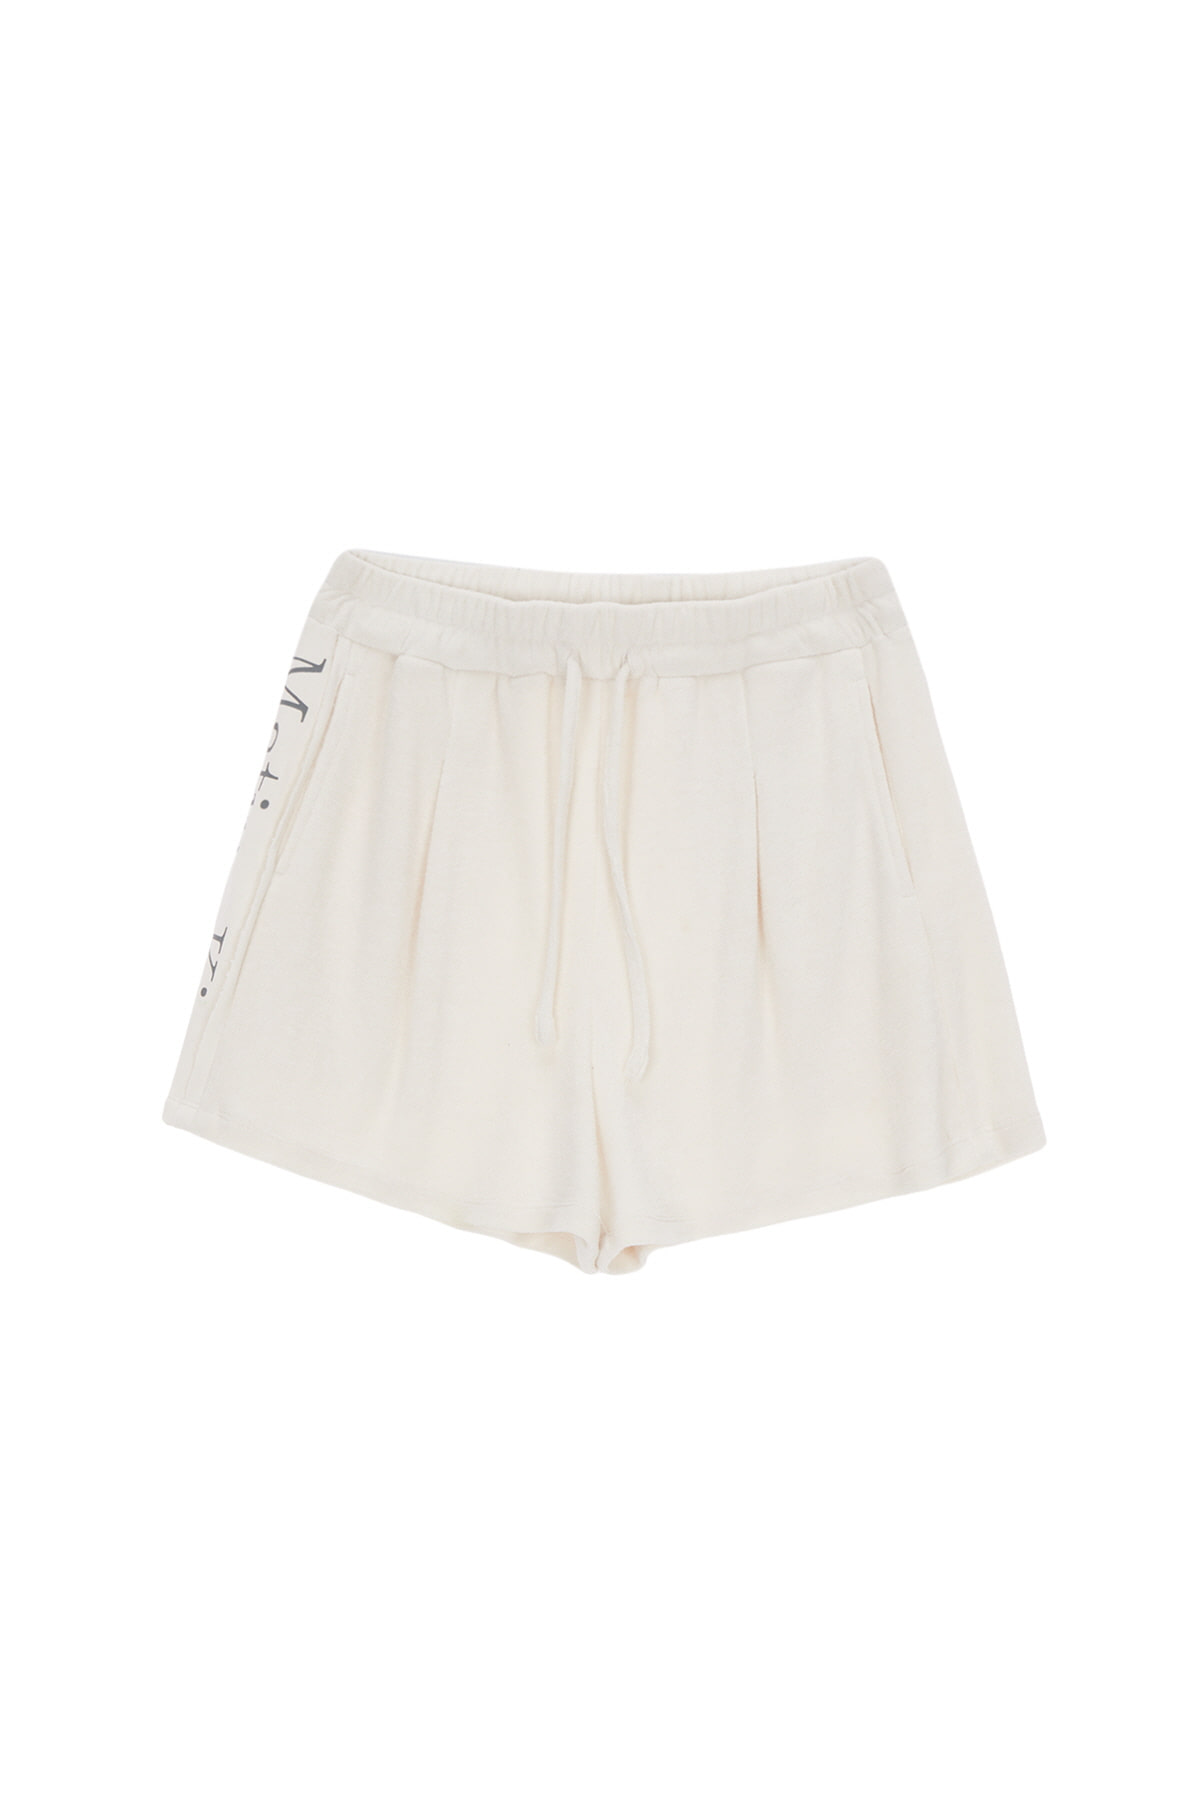 TERRY SHORT PANTS IN IVORY